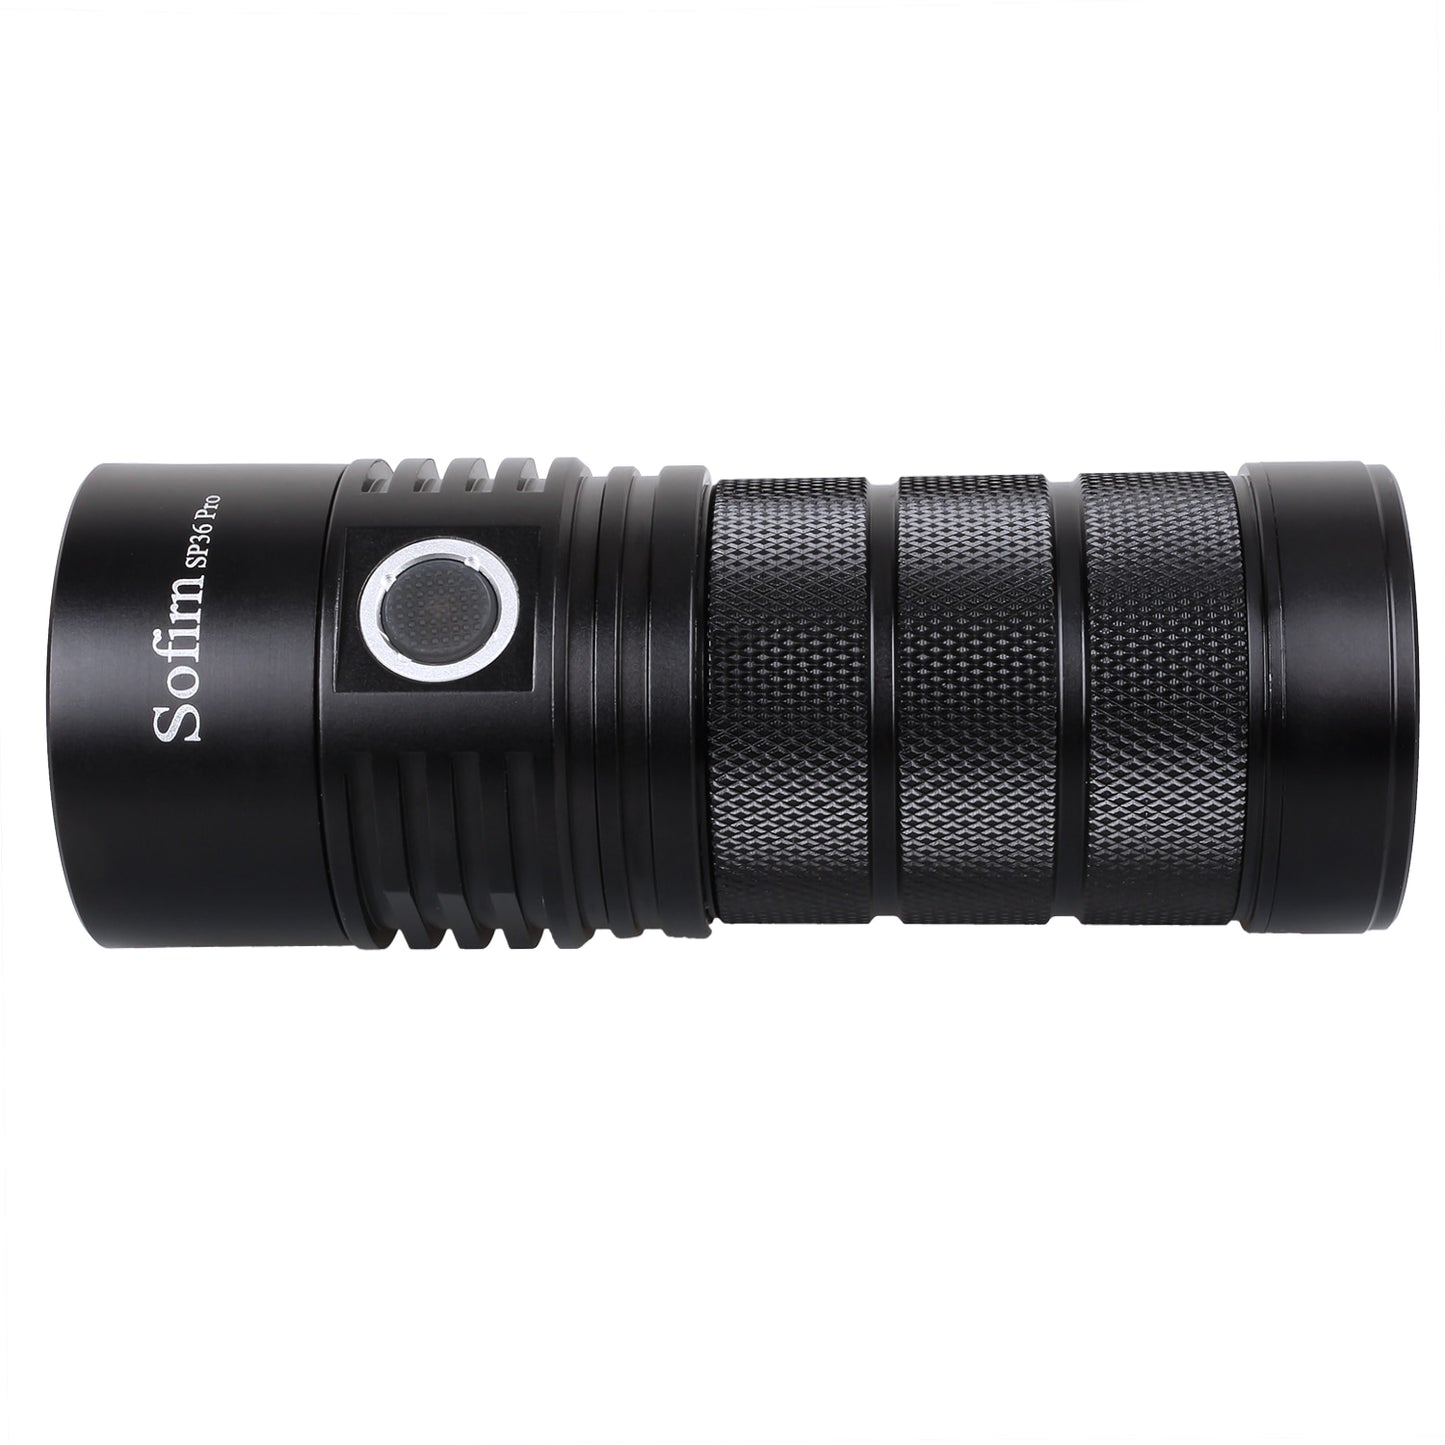 Pro LED Flashlight - 8000lm, USB C Rechargeable, 4-SST40 Torch